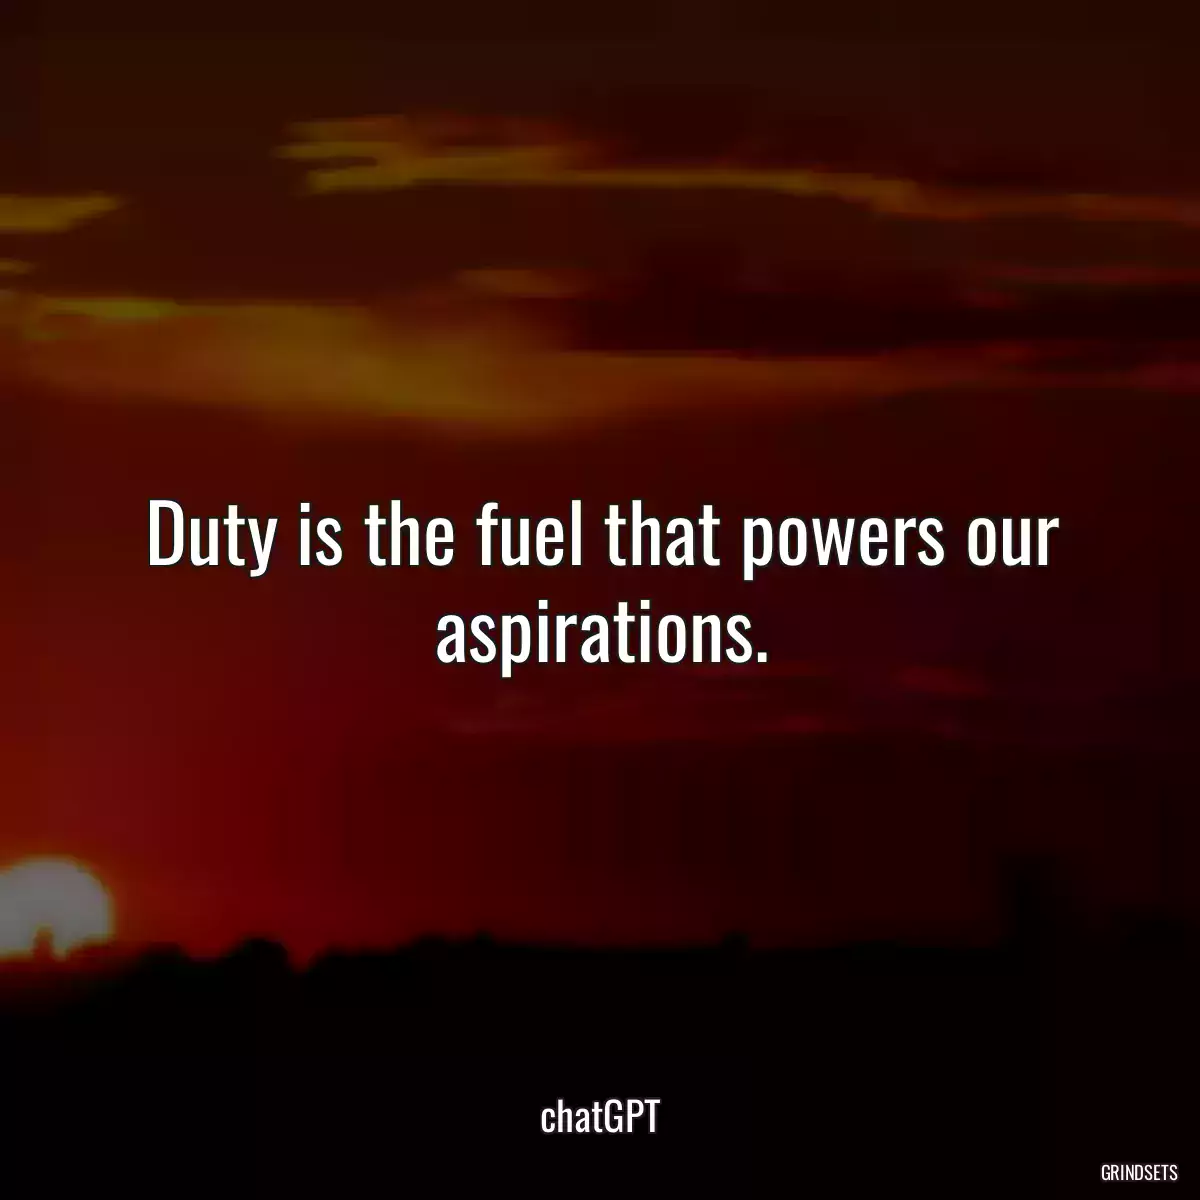 Duty is the fuel that powers our aspirations.